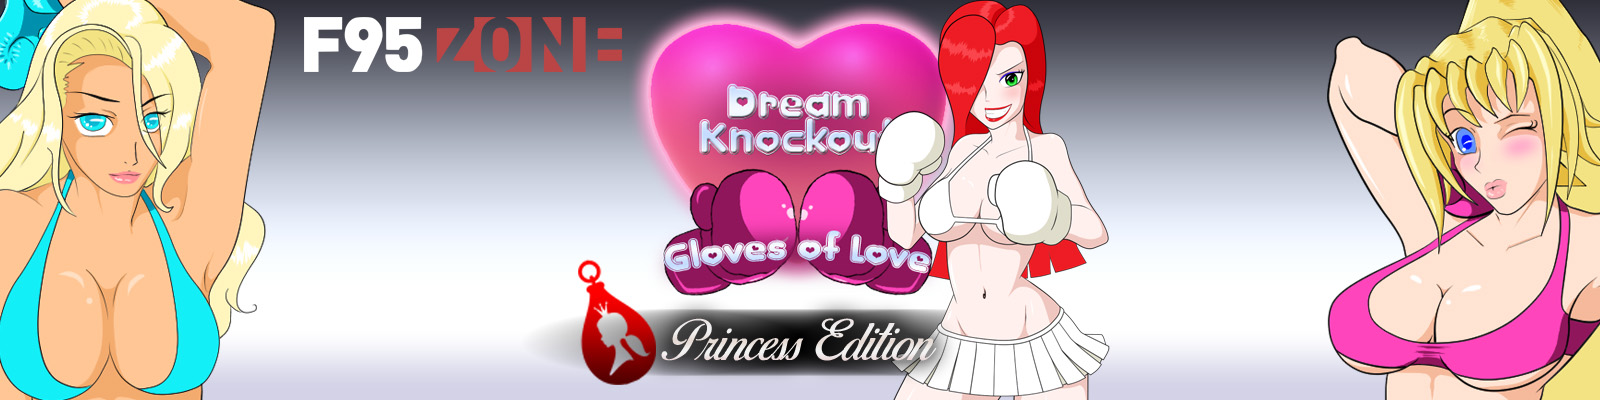 BlueBowser 99 - Dream Knockout: Gloves of Love "Strawberry Edition" v2.0.3